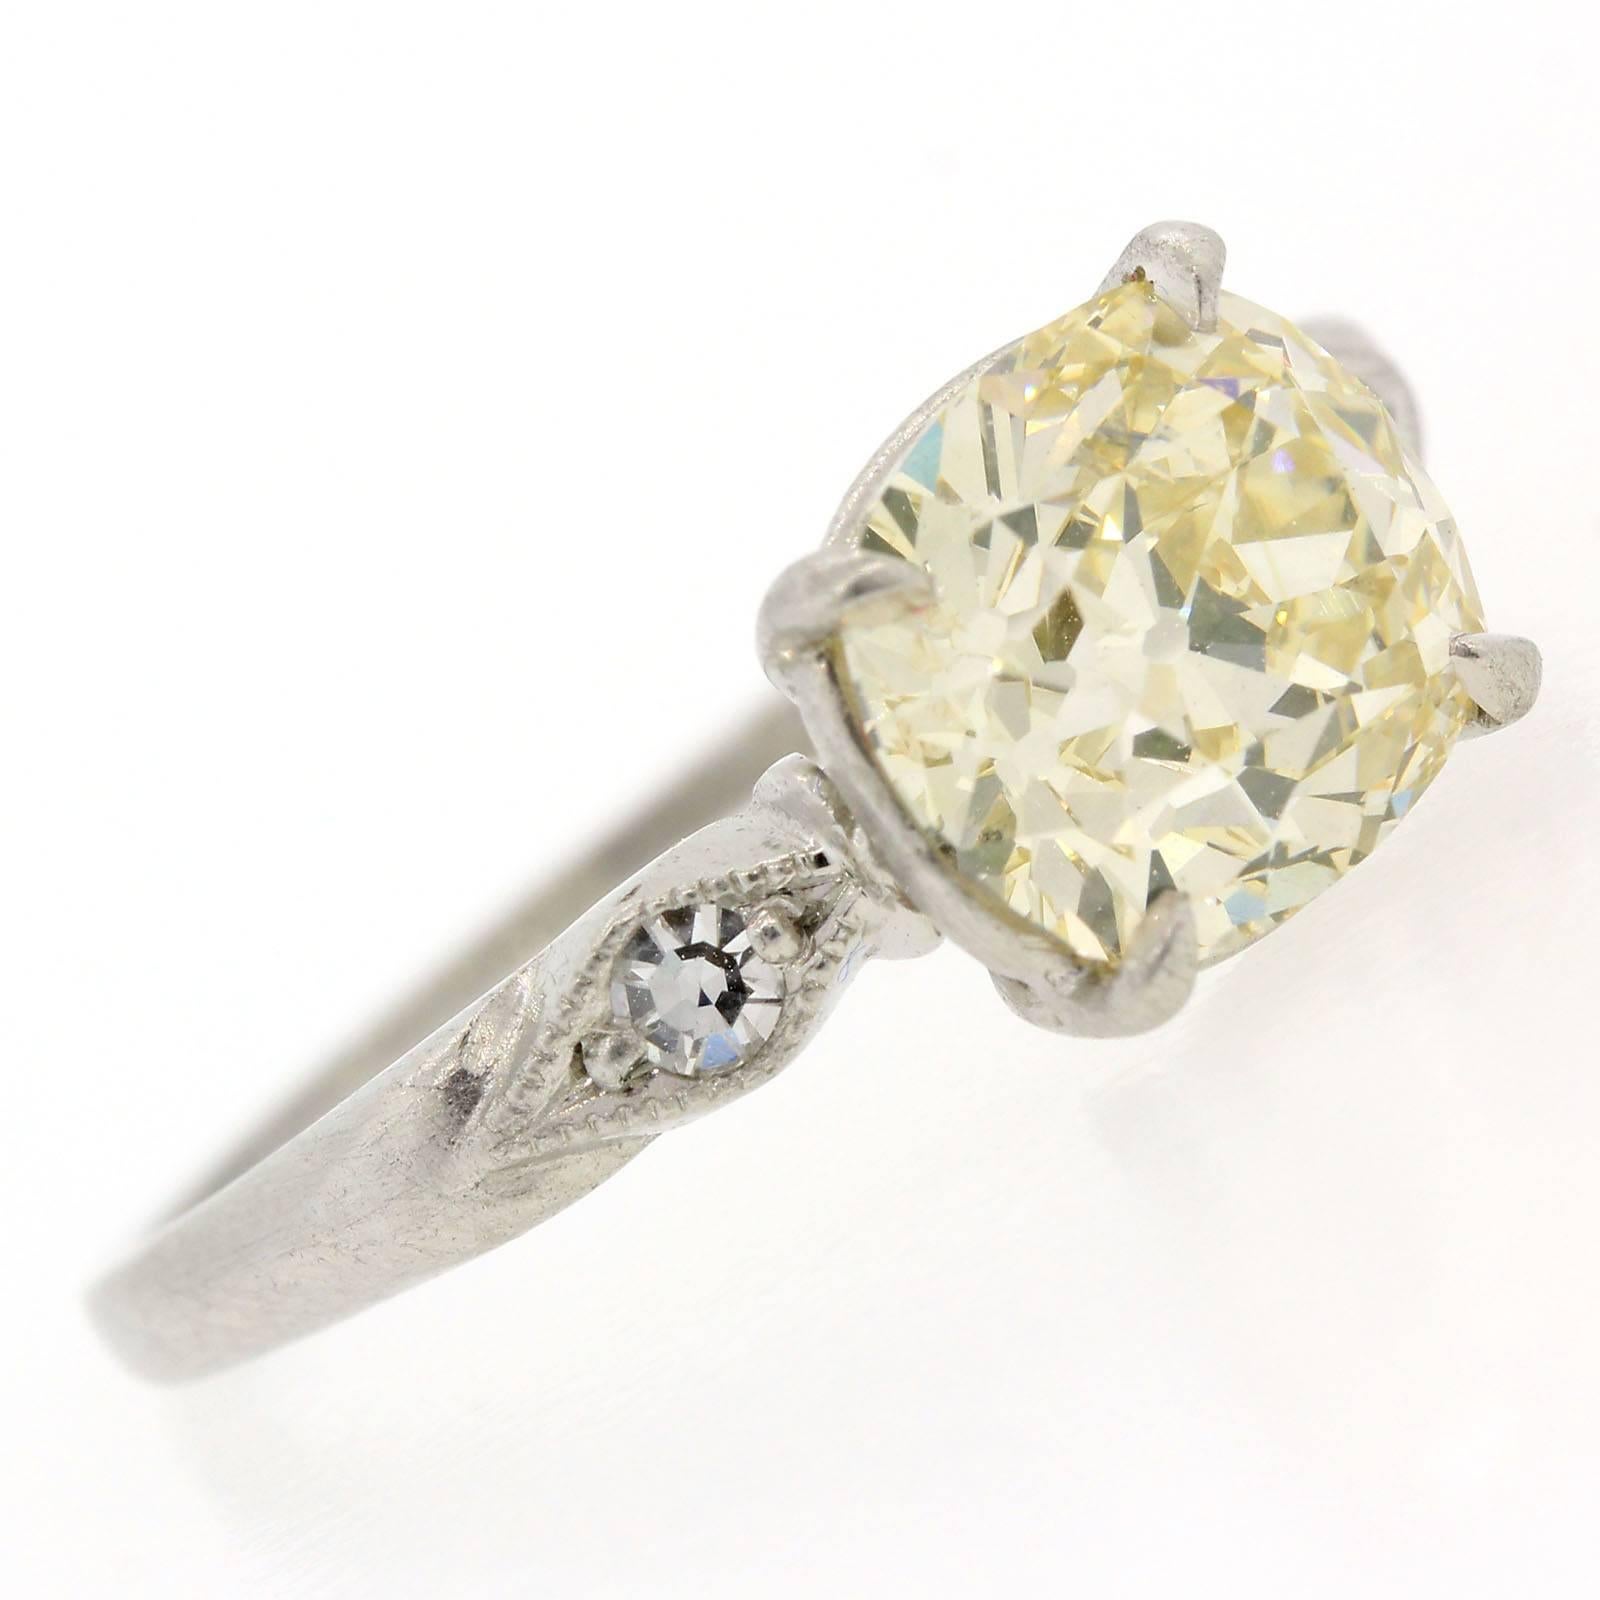 A beautiful engagement ring from the 1940s, this platinum ring features a 2.25 Old Mine Cushion Cut Diamond.  The diamond is certified of warm Q color - SI clarity and is flanked by two old Single Cut Diamonds.   A gorgeous ring!